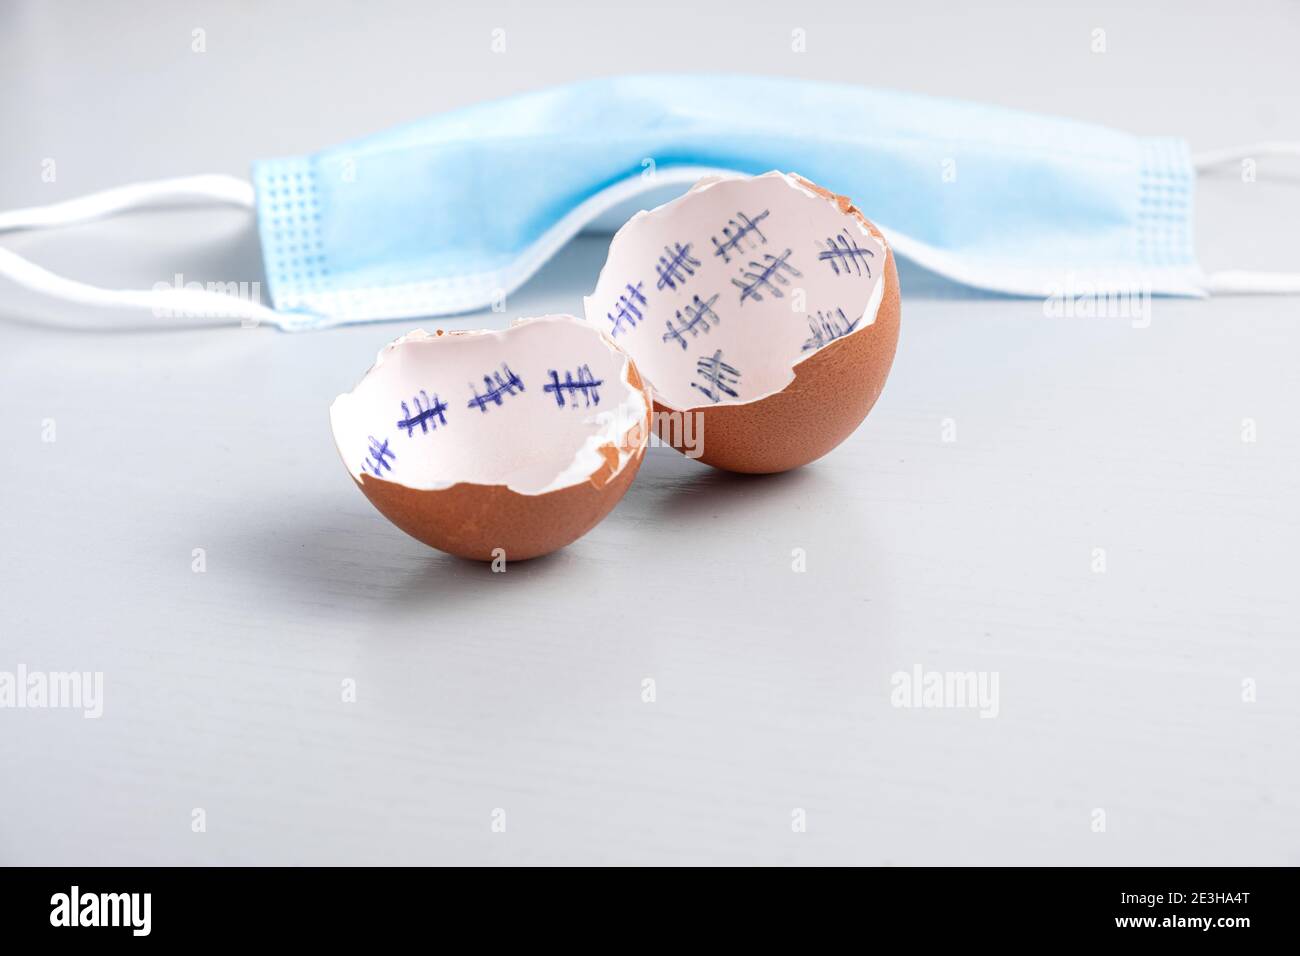 Hatched and opened egg with calendar markings and a medical mask in the background with corona virus meaning Stock Photo